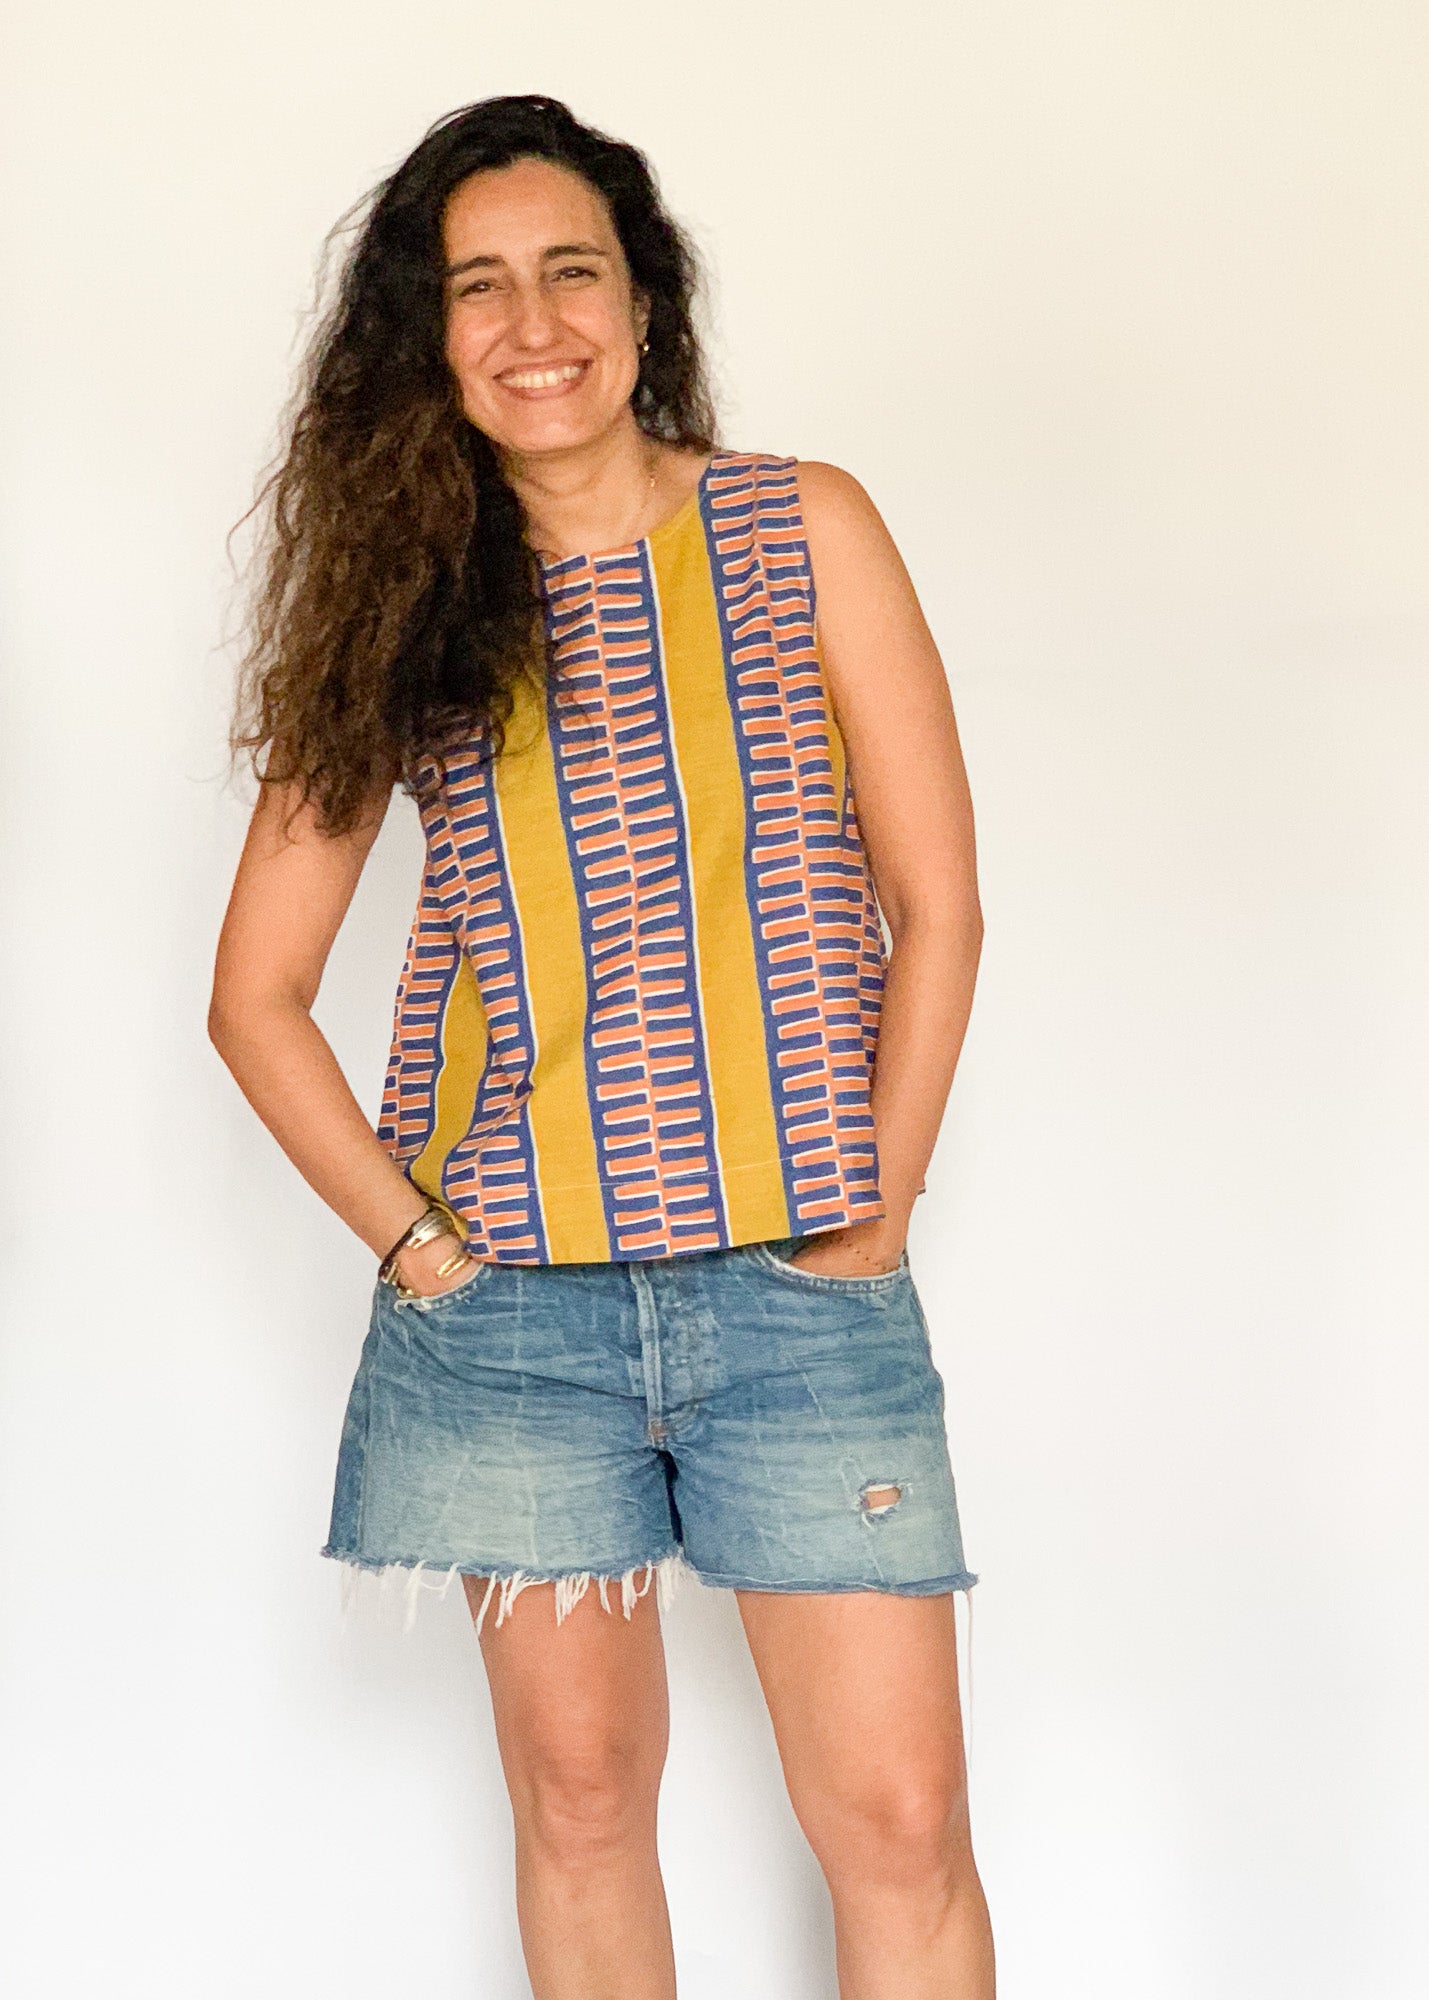 The model is wearing olive-yellow, blue, orange and white geometric printed  tank